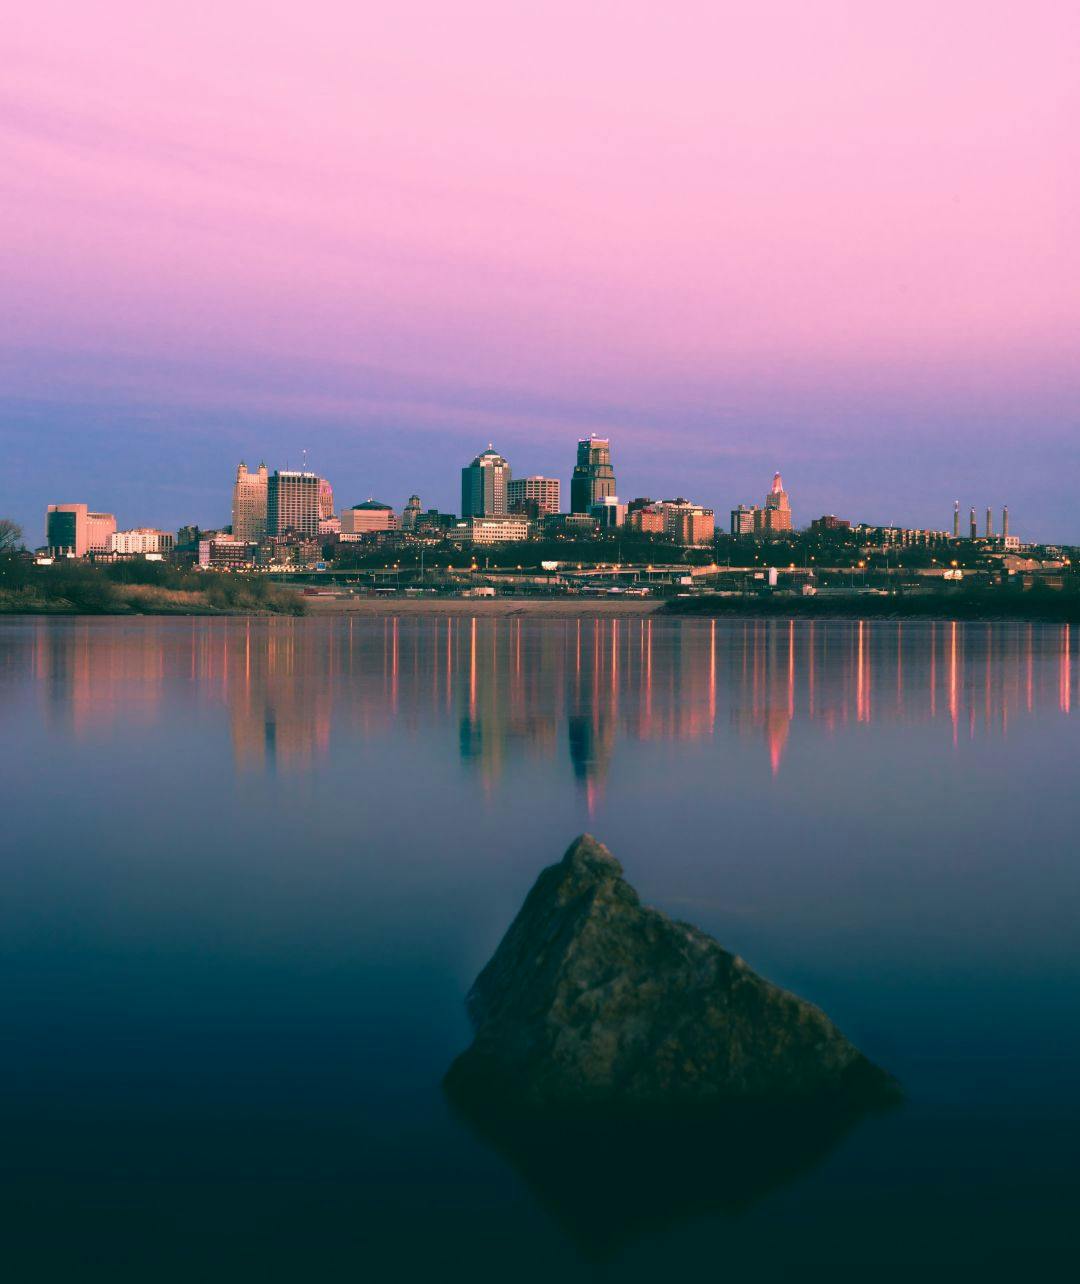 A shot of Kansas city from the water